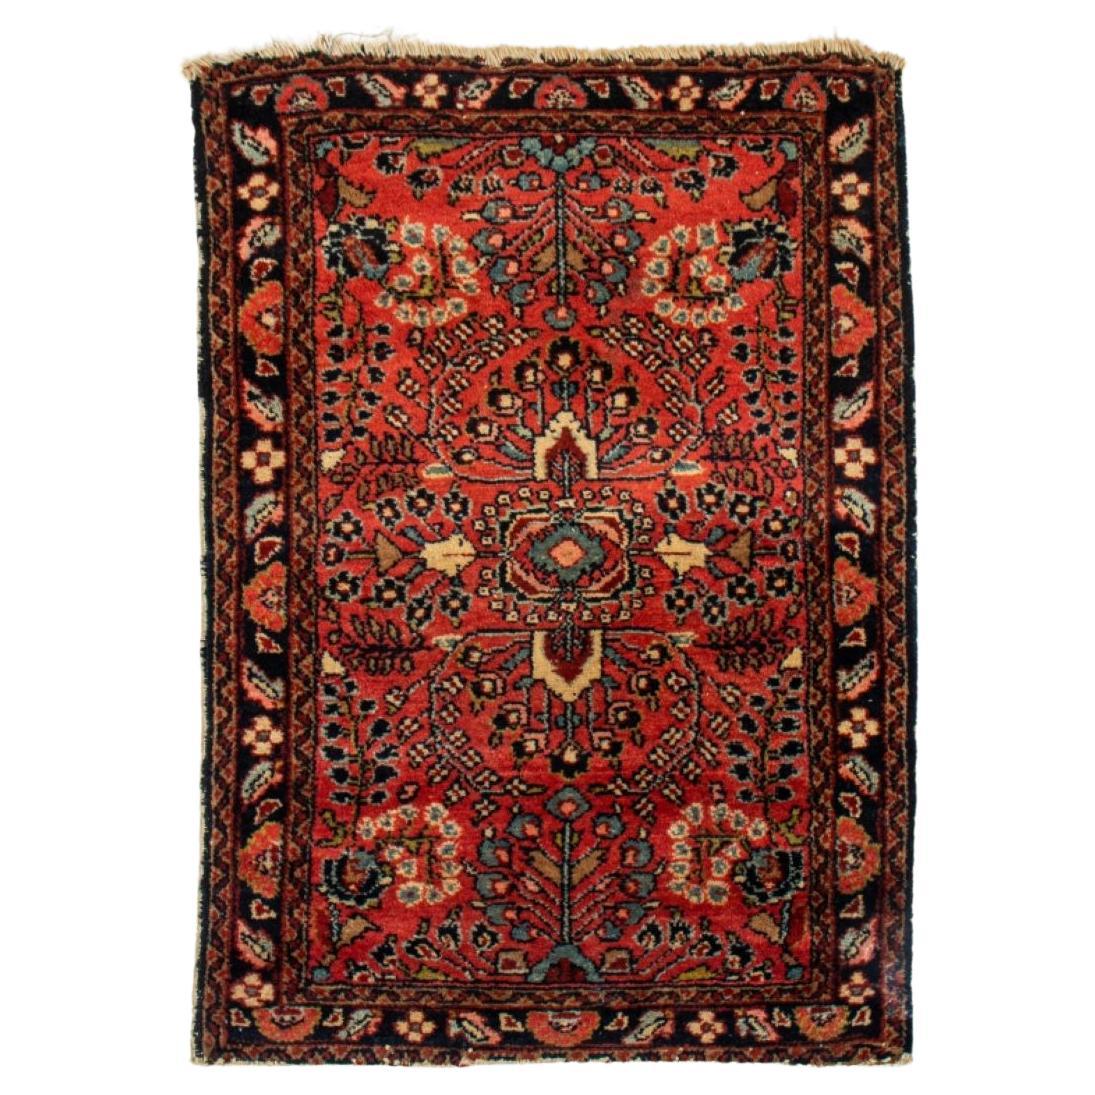 Antique Persian Diminutive Rug 3' x 2' For Sale